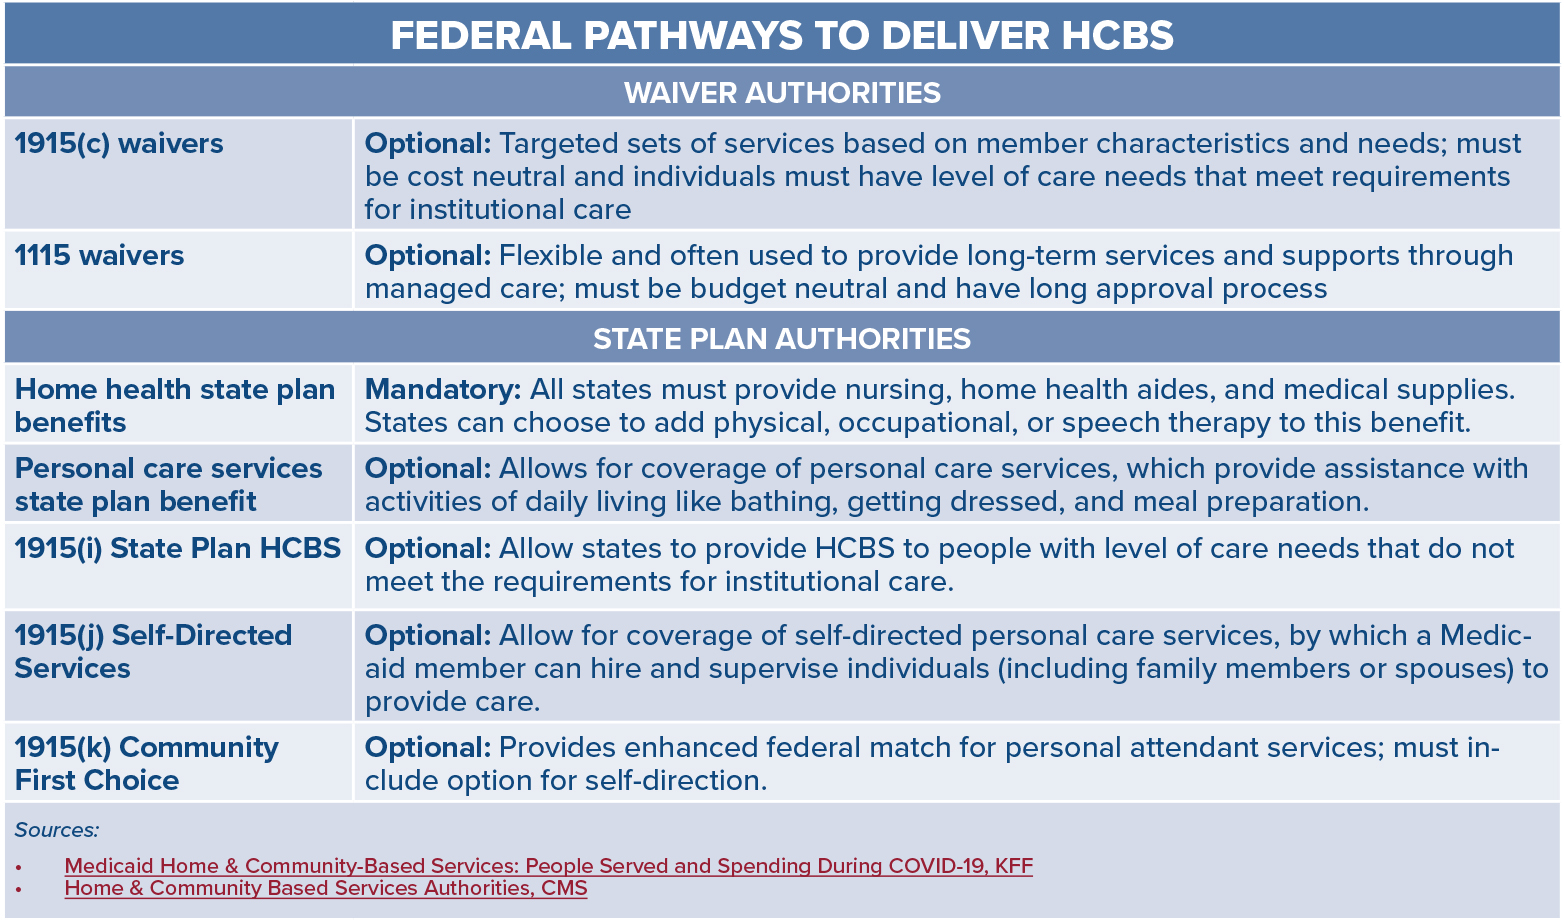 Explainer on the seven federal pathways, both required and optional, for delivering home and community-based services